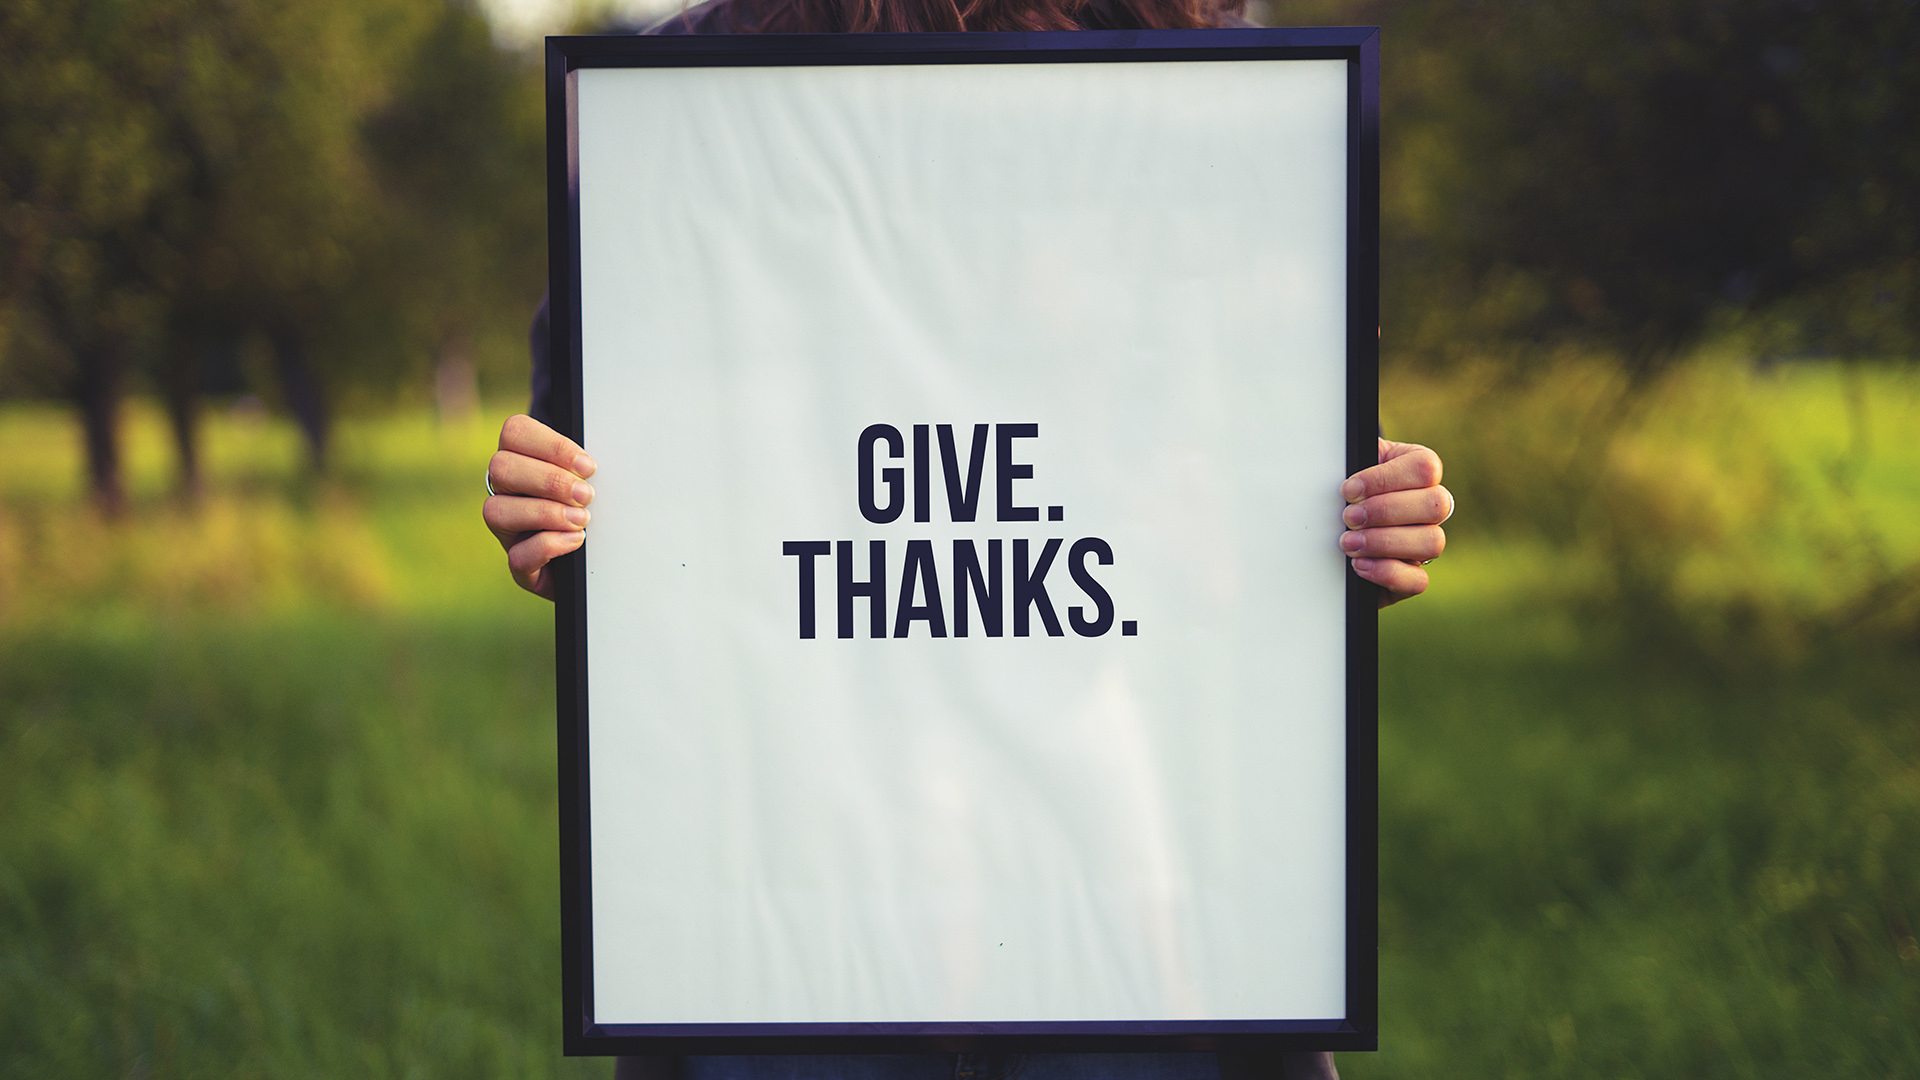 How to boost your mental wellbeing with gratitude